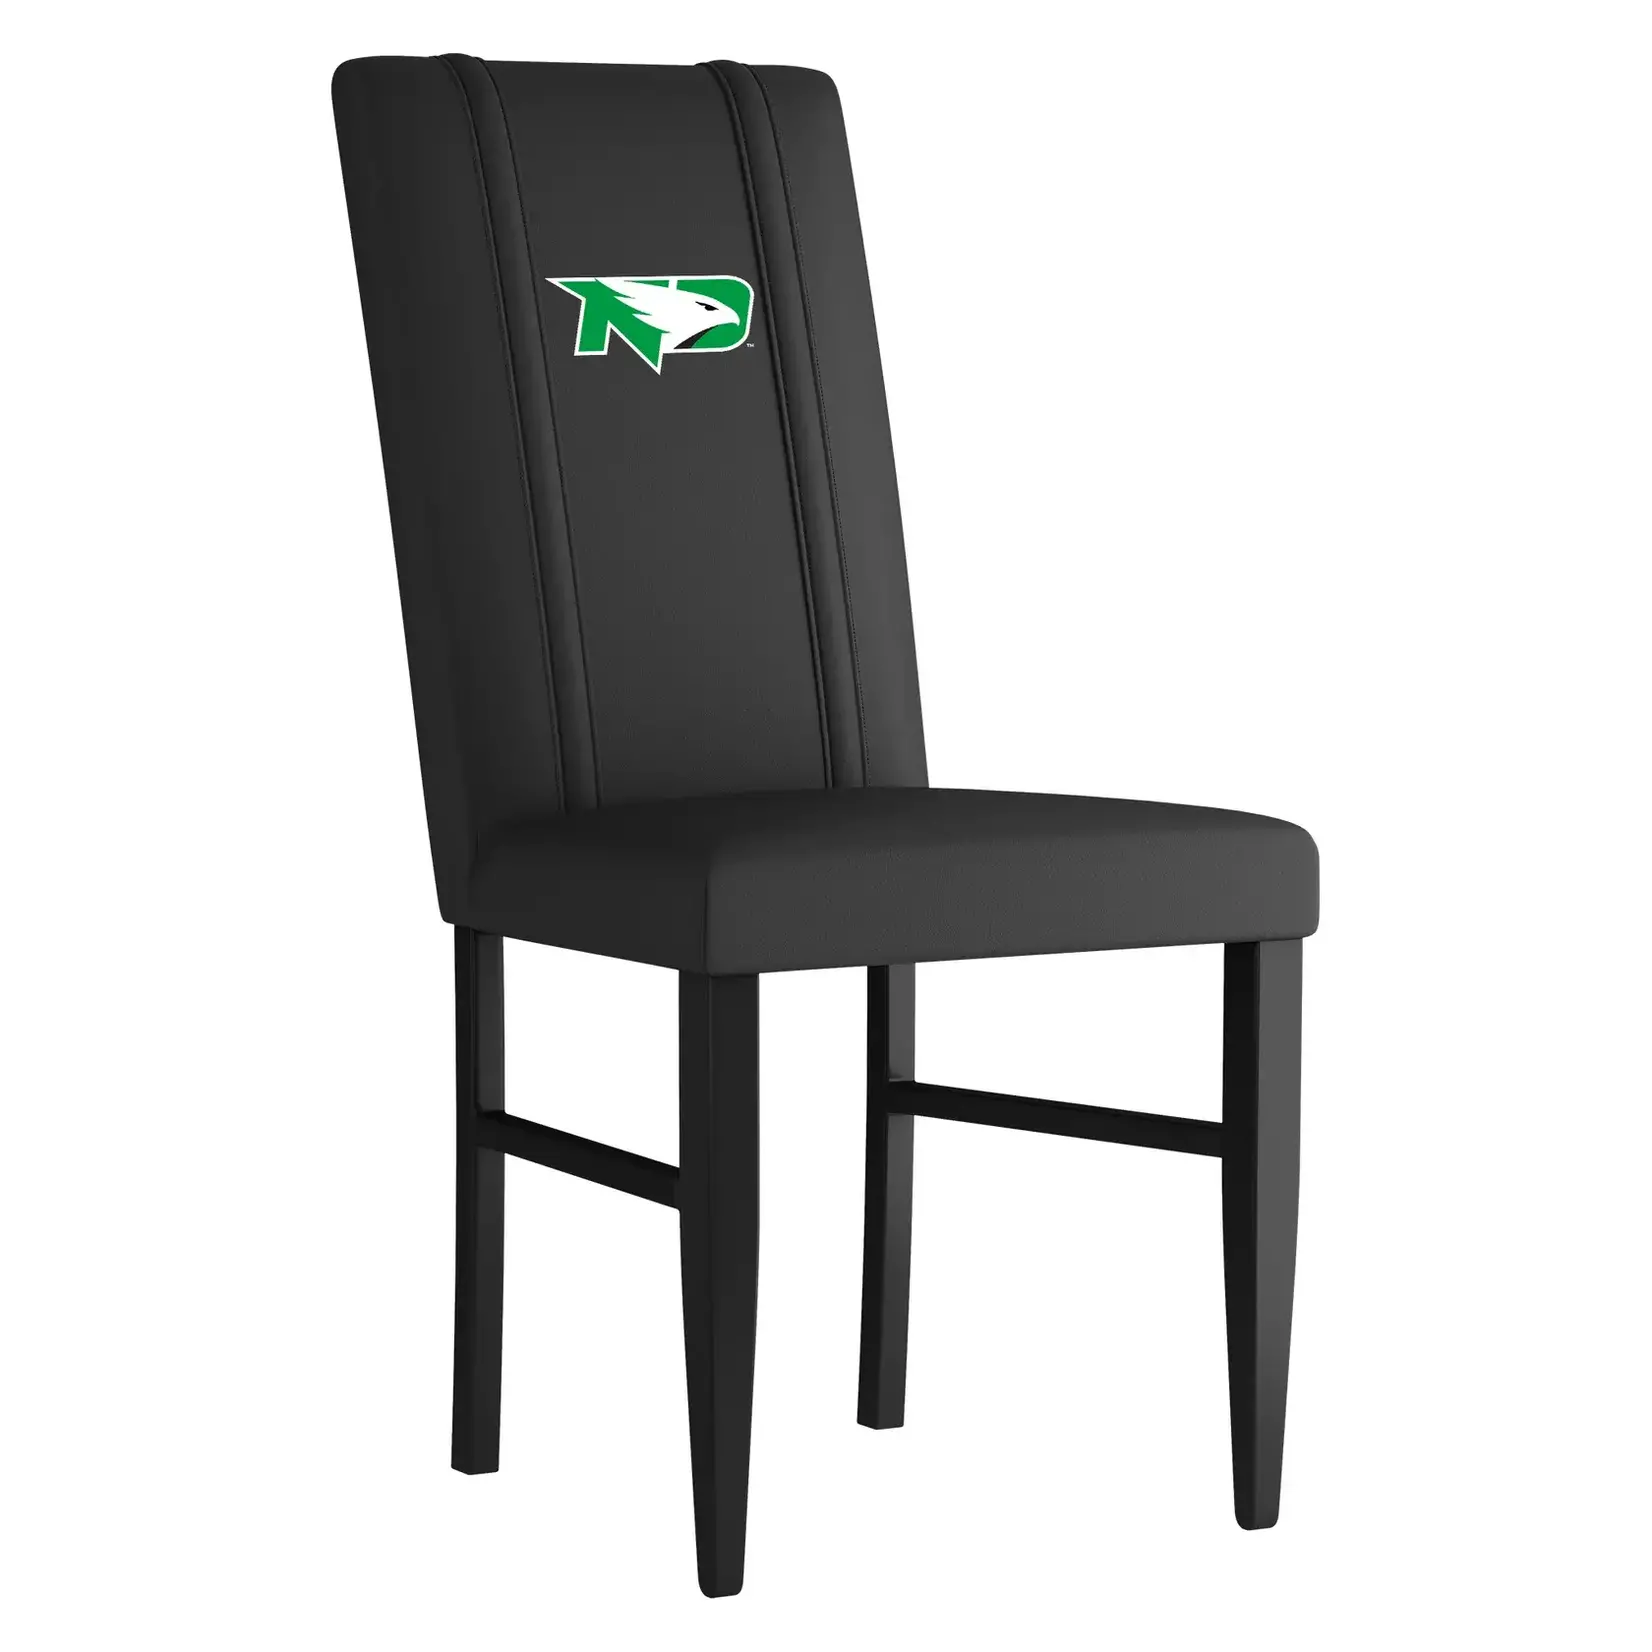 DreamSeat Side Chair 2000 Set of 2 Chairs